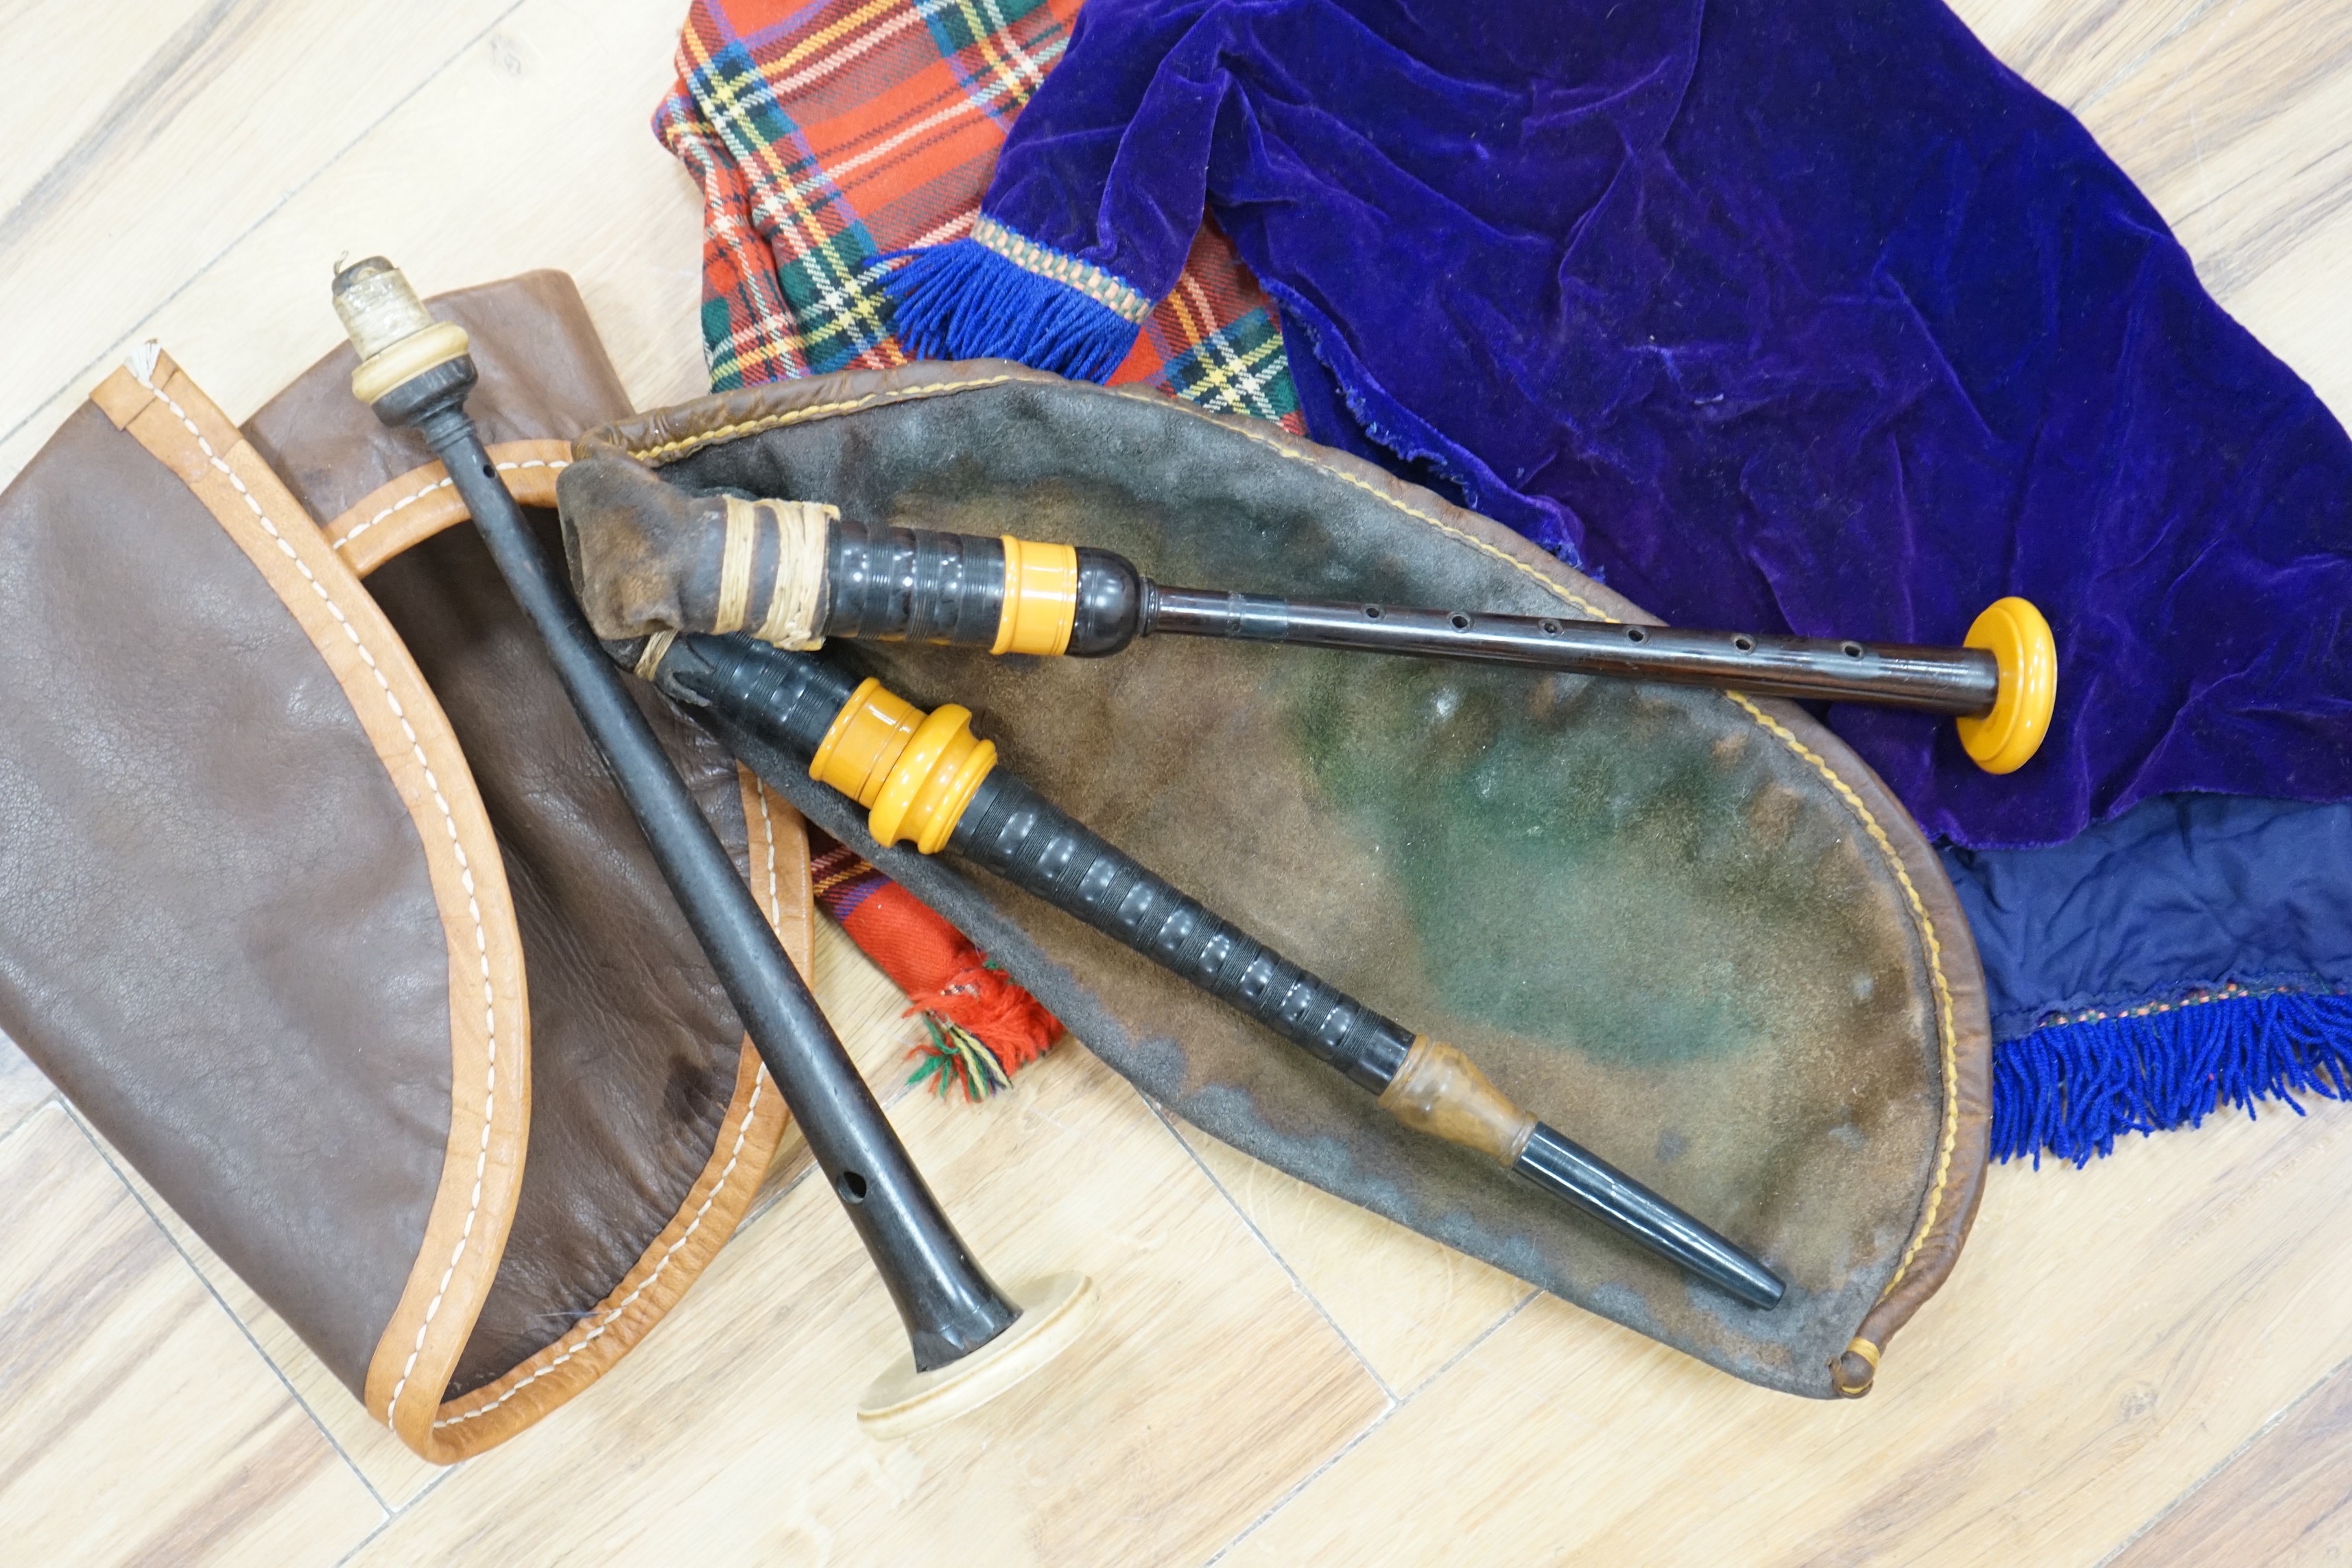 Two practice sets of bagpipes, one cased